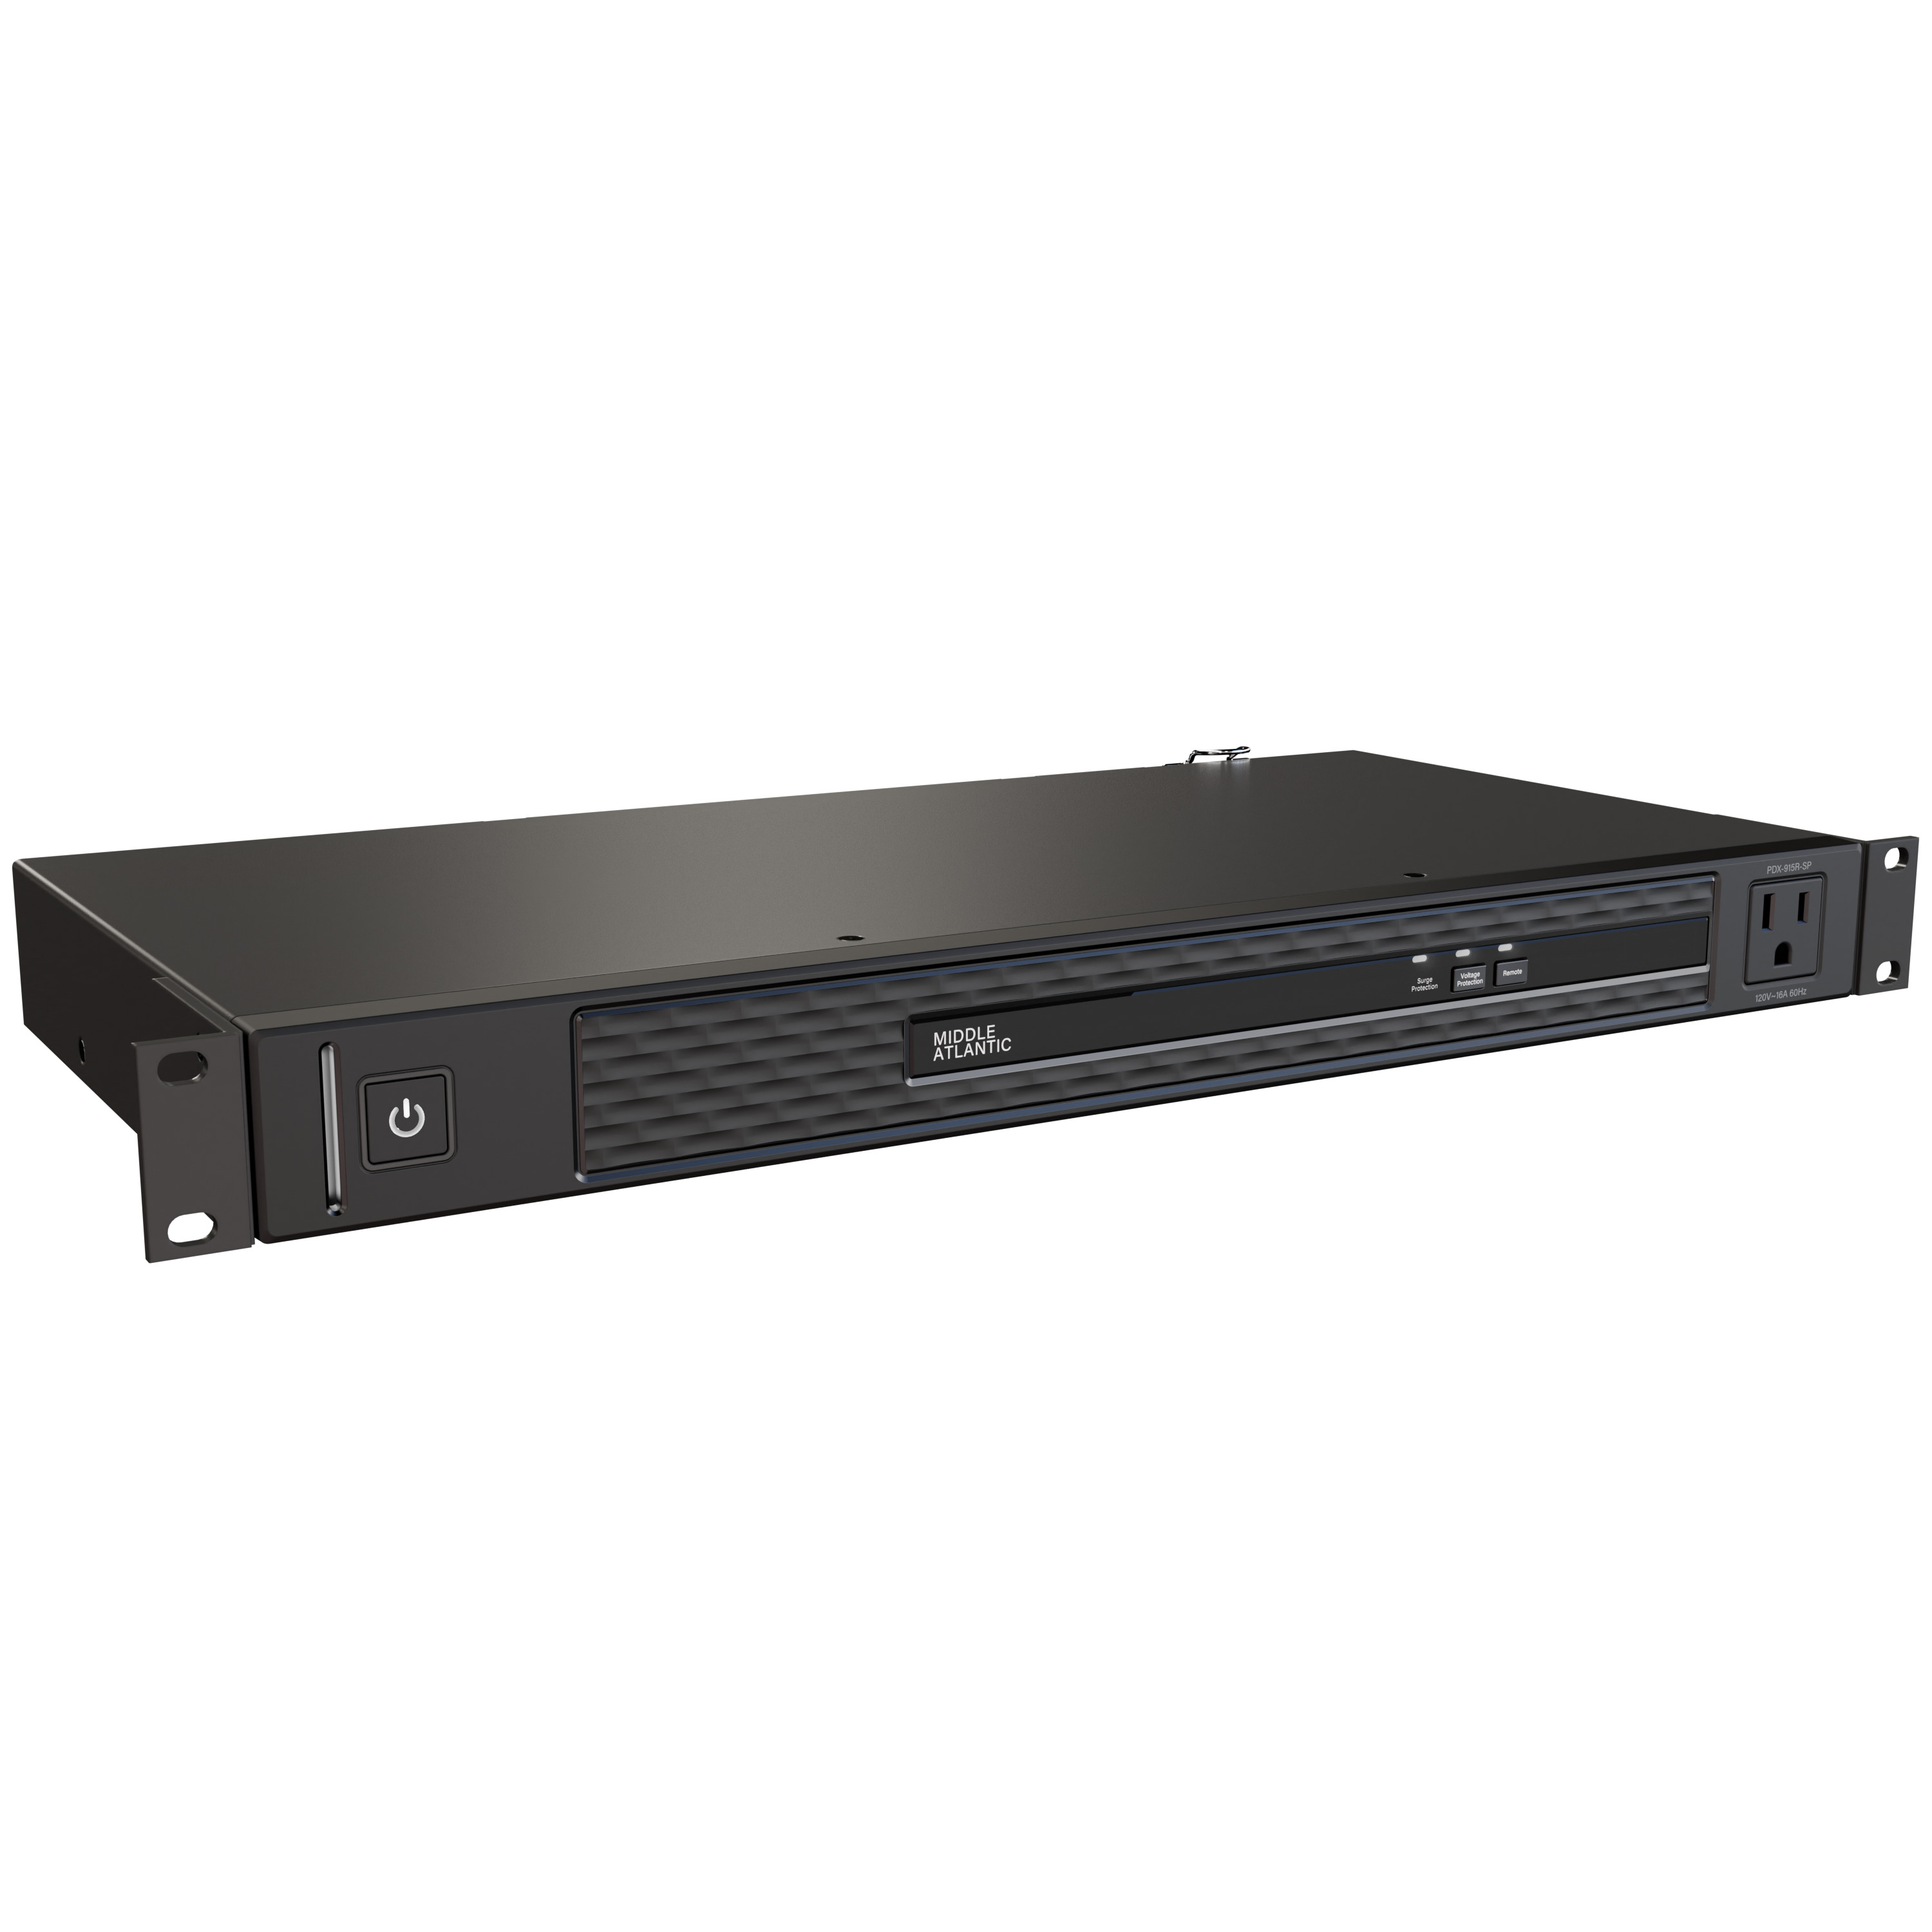 Image showing the front of the NEXSYS Rackmount Power Series Surge Protection PDX-915R-SP